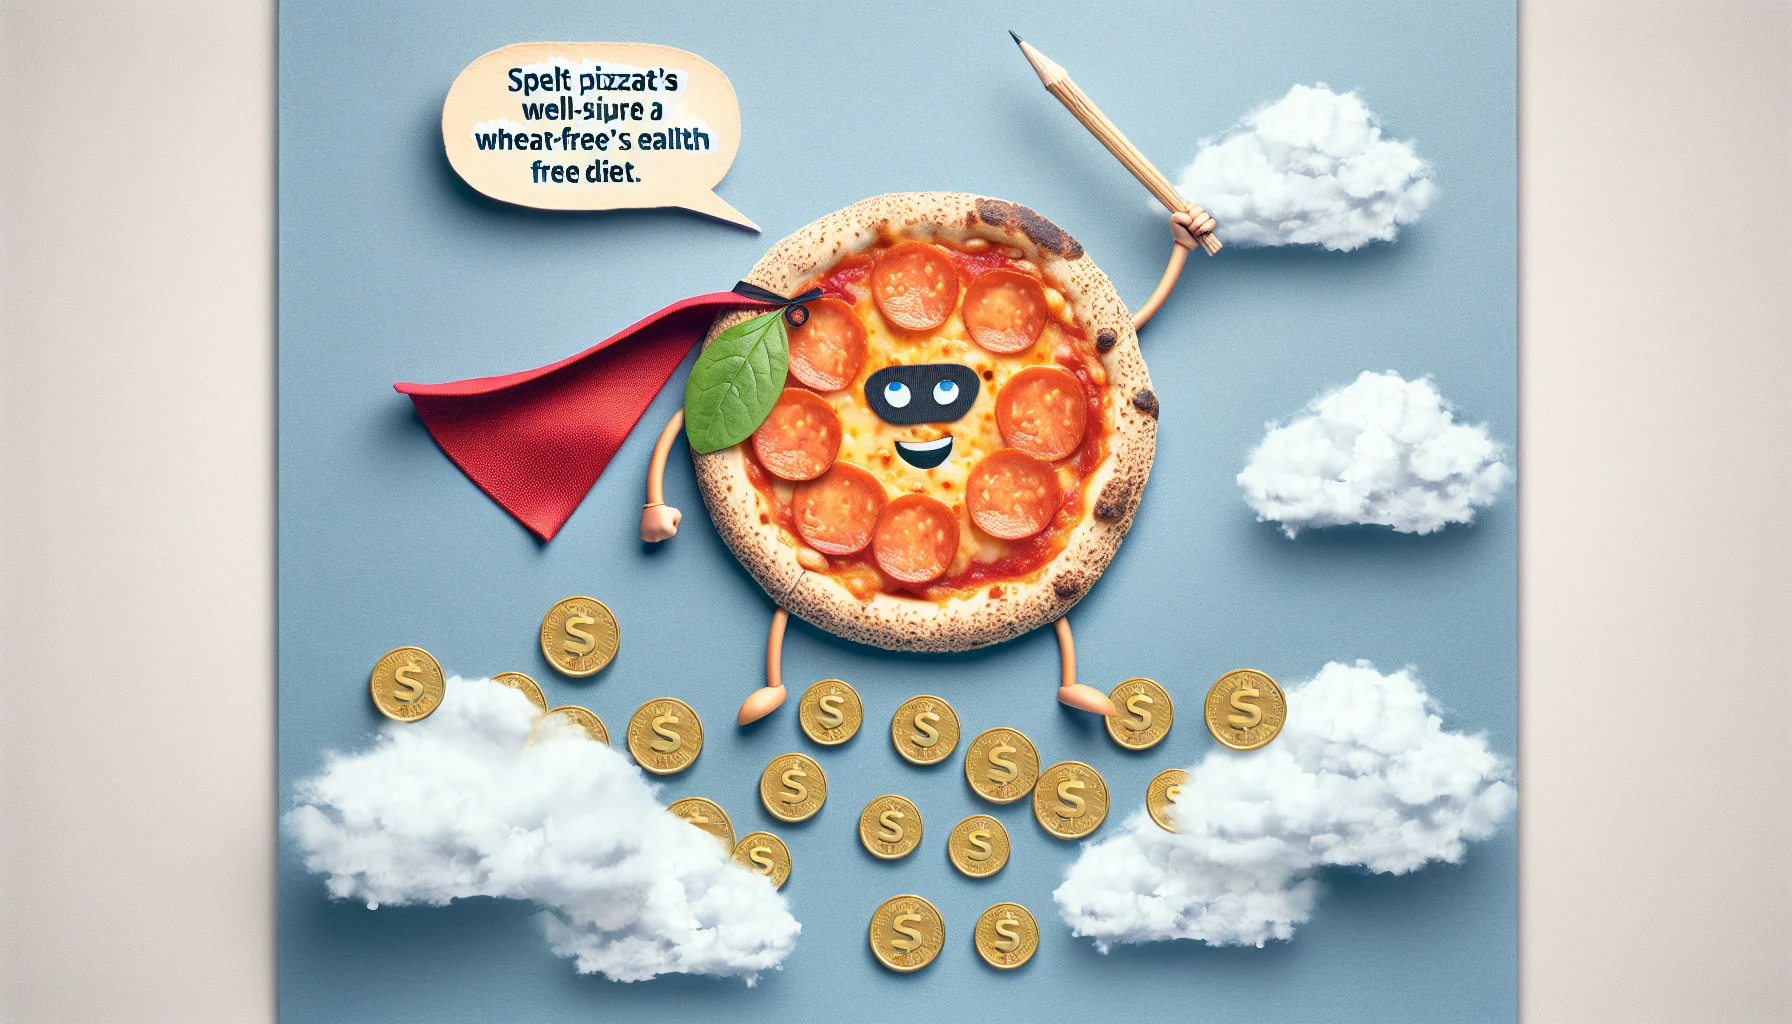 Craft a comical, realistic scene that showcases a Spelt Pizza Crust well-suited for a wheat-free diet. The image should have a playful tone and highlight the affordability. The pizza might be positioned as a superhero wearing a cape, flying through the sky, with coins following behind to signify cost-effectiveness. It's an adorable personification of the pizza, in-process of saving the day with healthy and affordable eating alternatives.